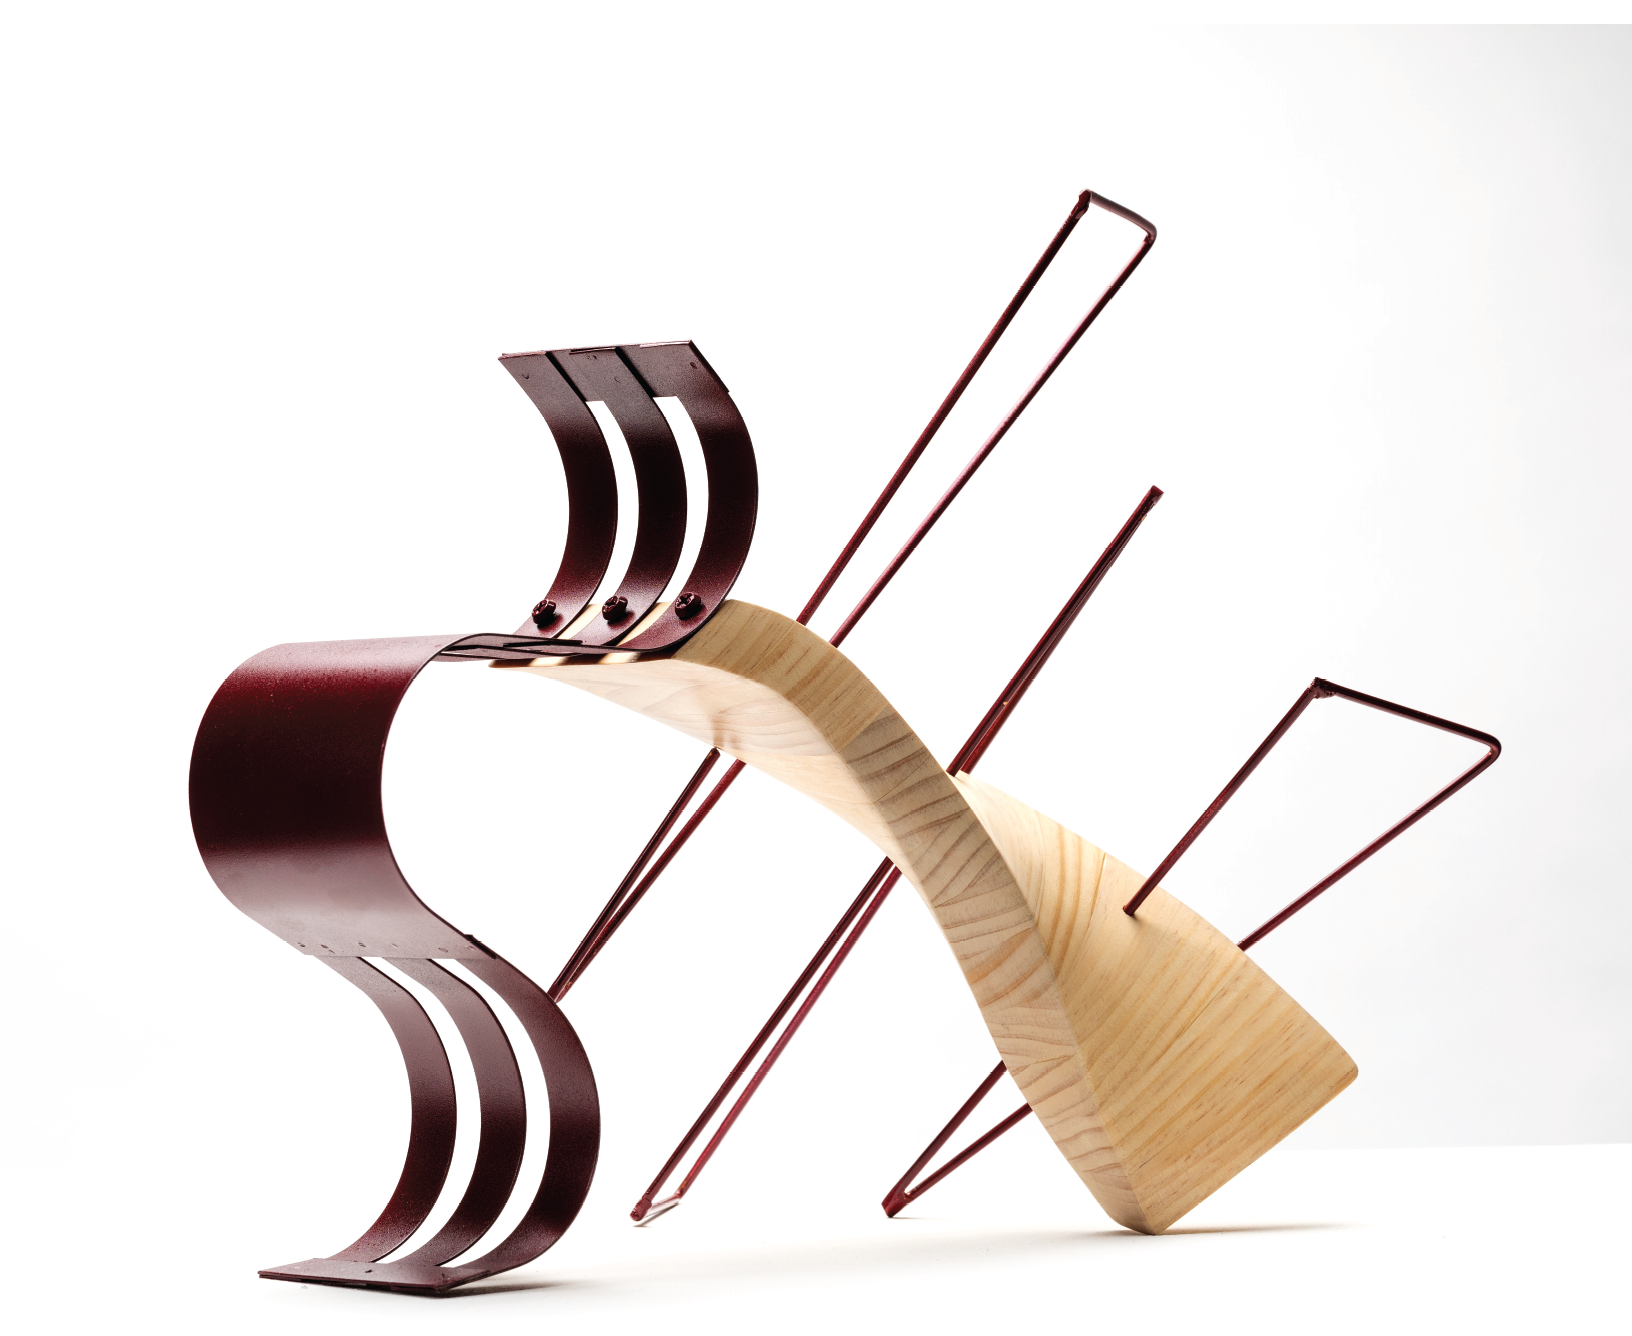 abstract wood and metal sculpture with wire and curves